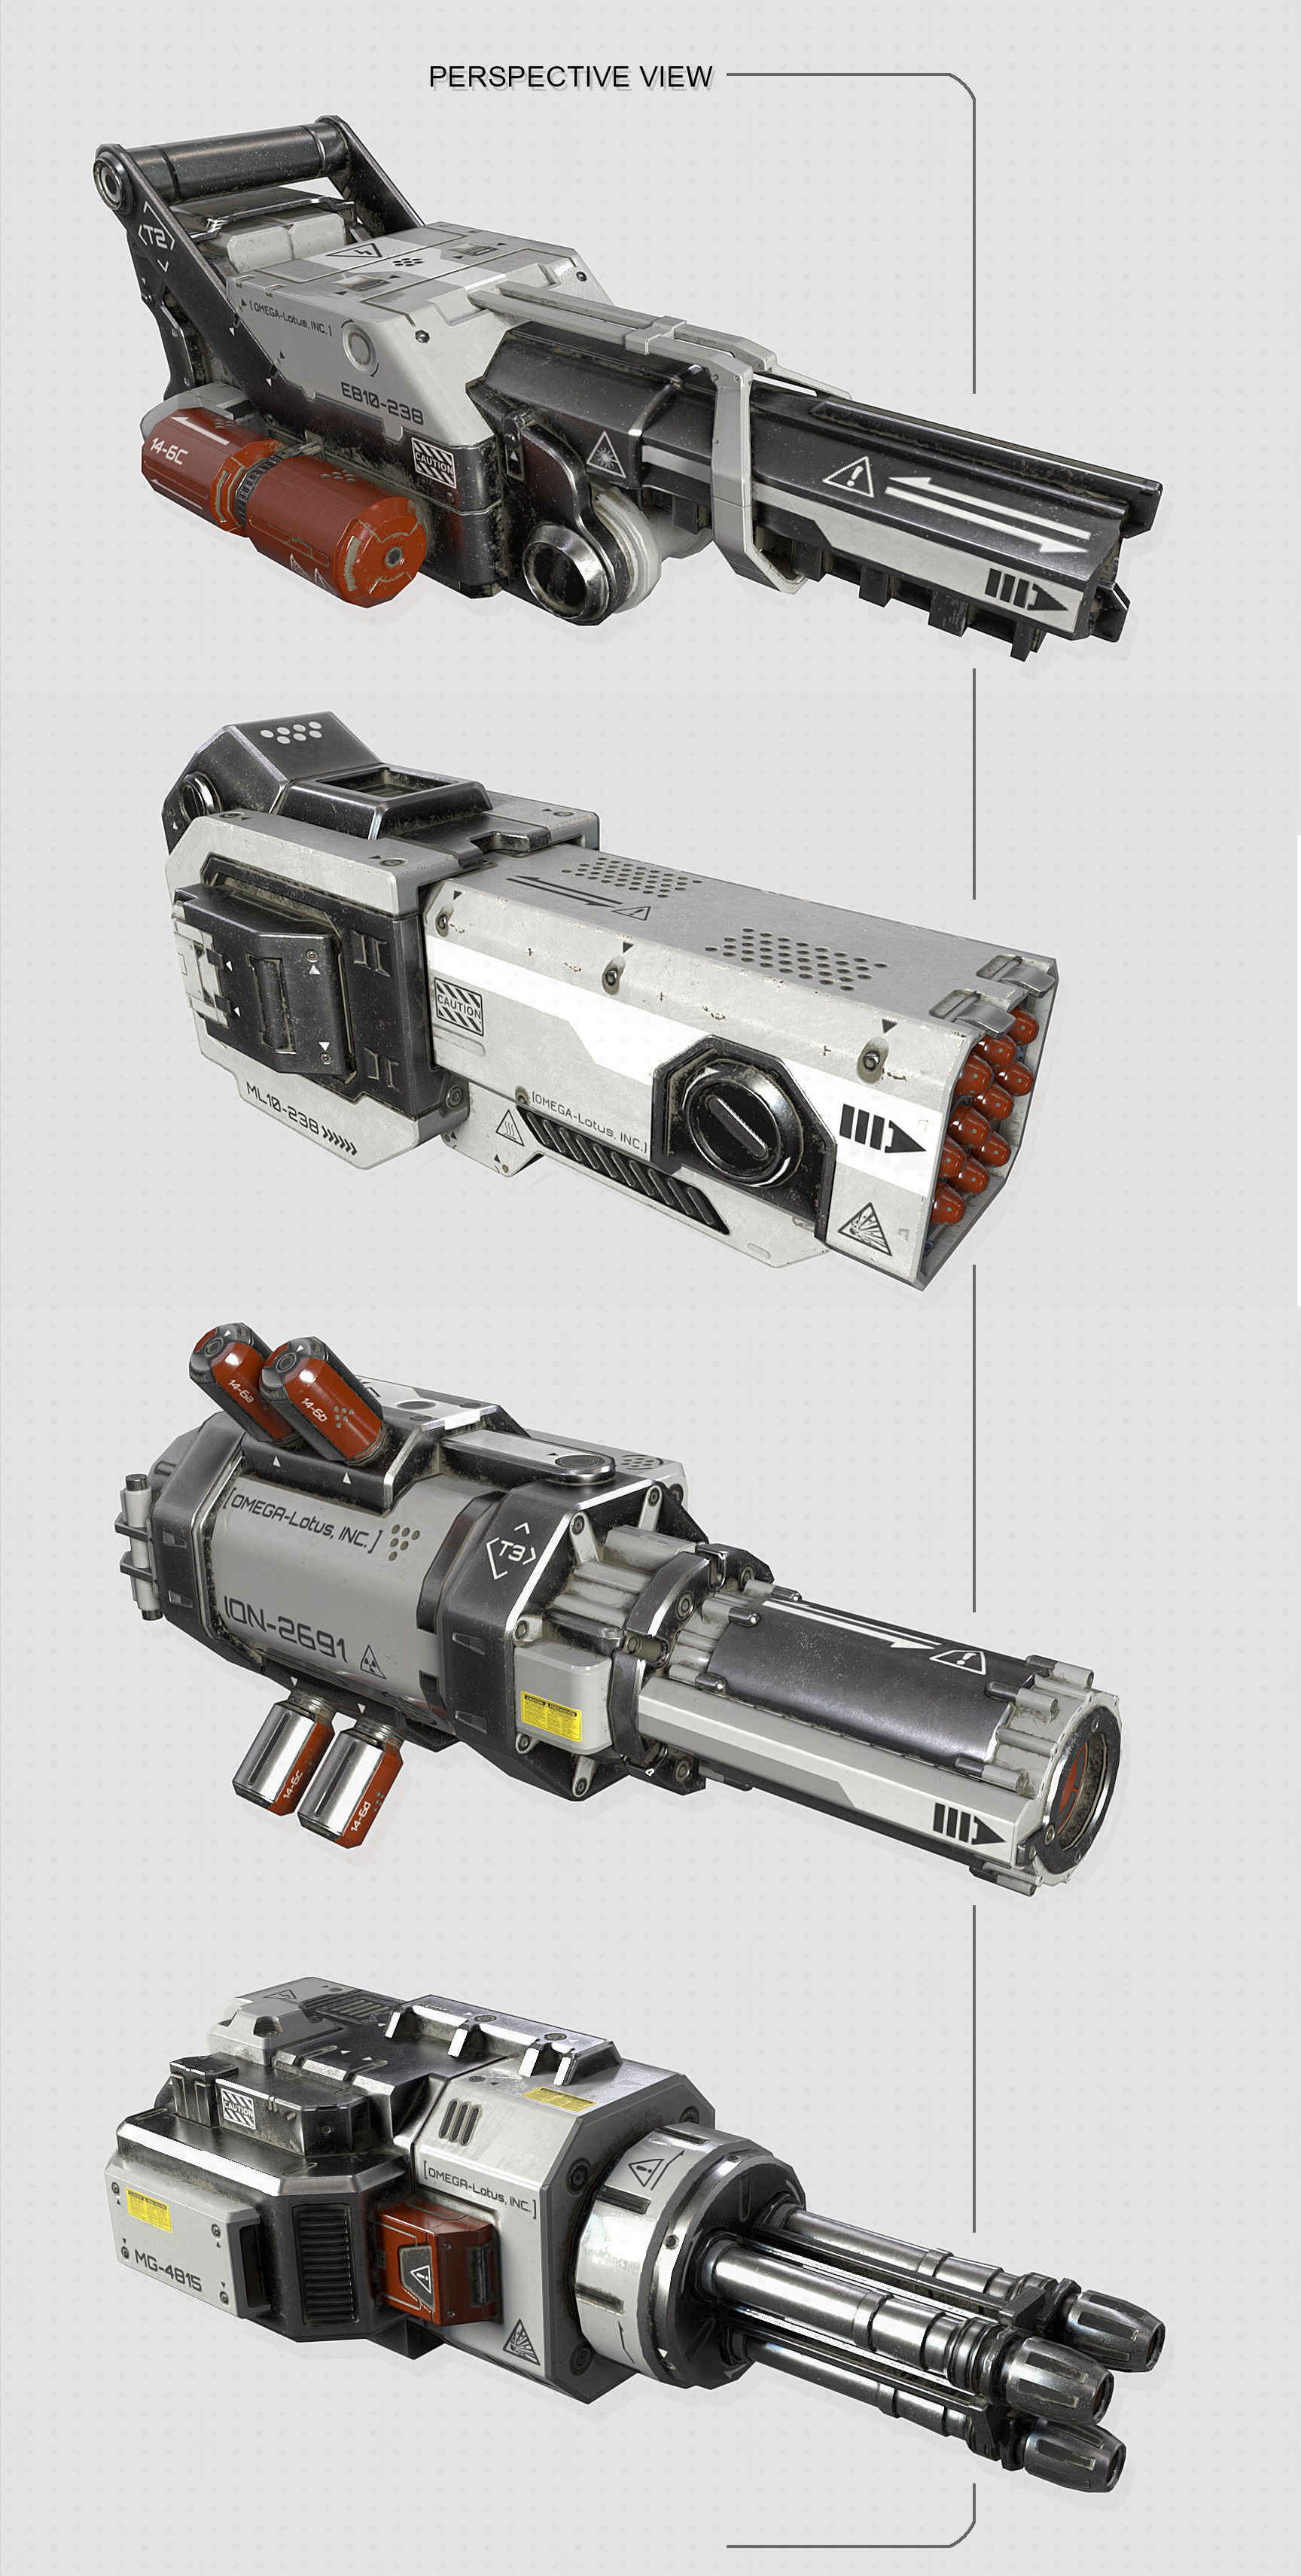 Sci Fi DPARC Weapon Systems